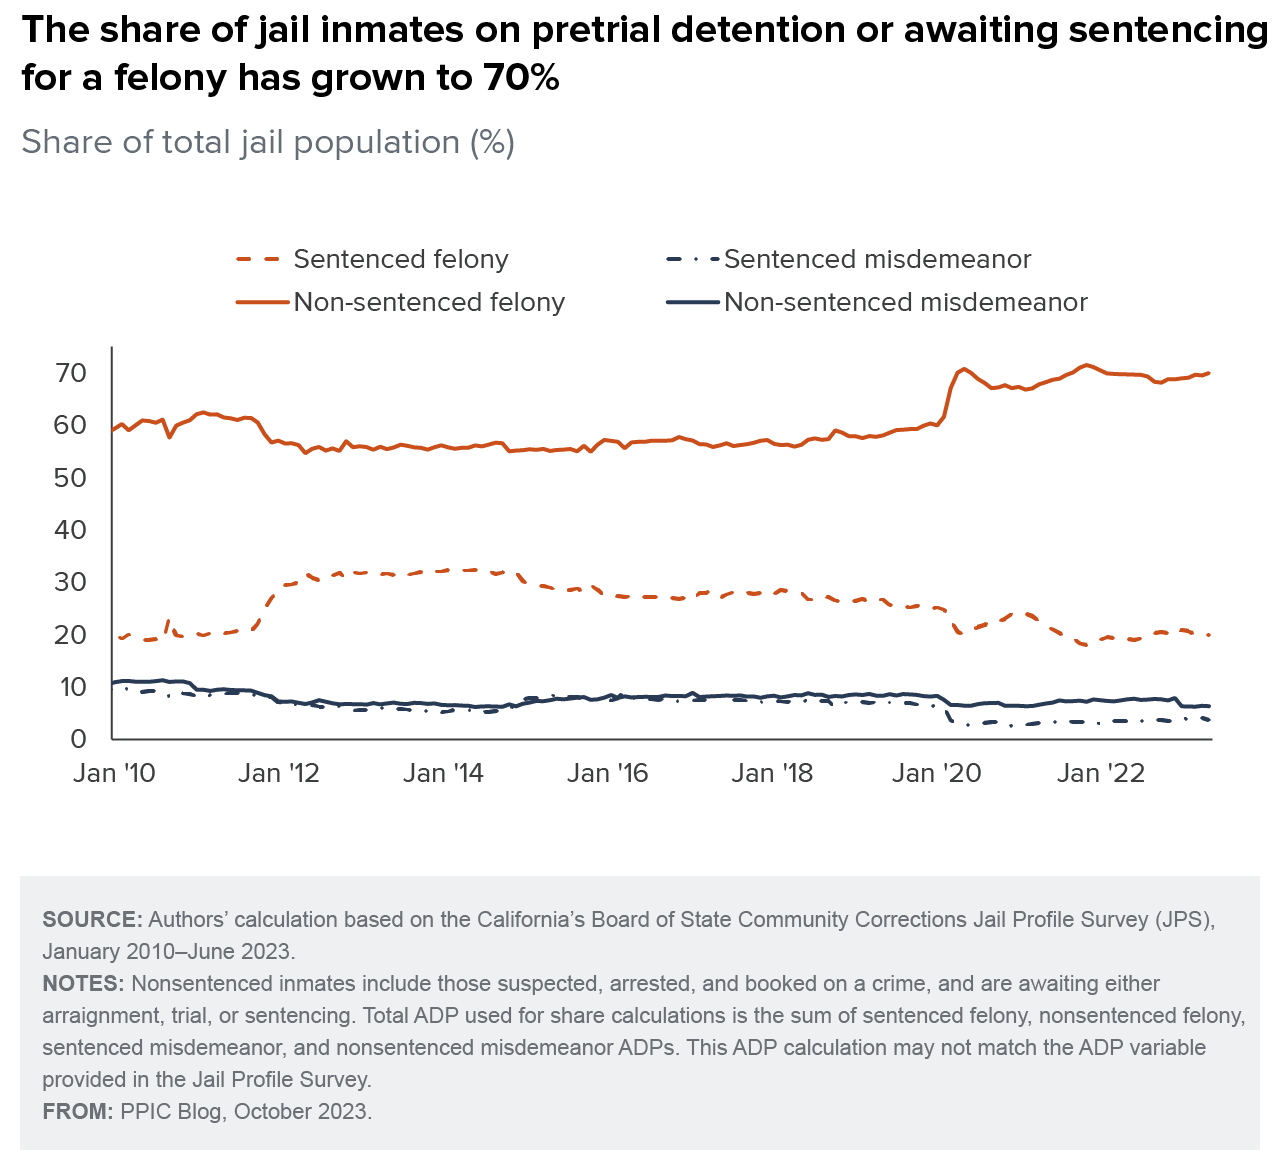 figure - The share of jail inmates on pretrail detention or awaiting sentencing for a felony has grown to 70%